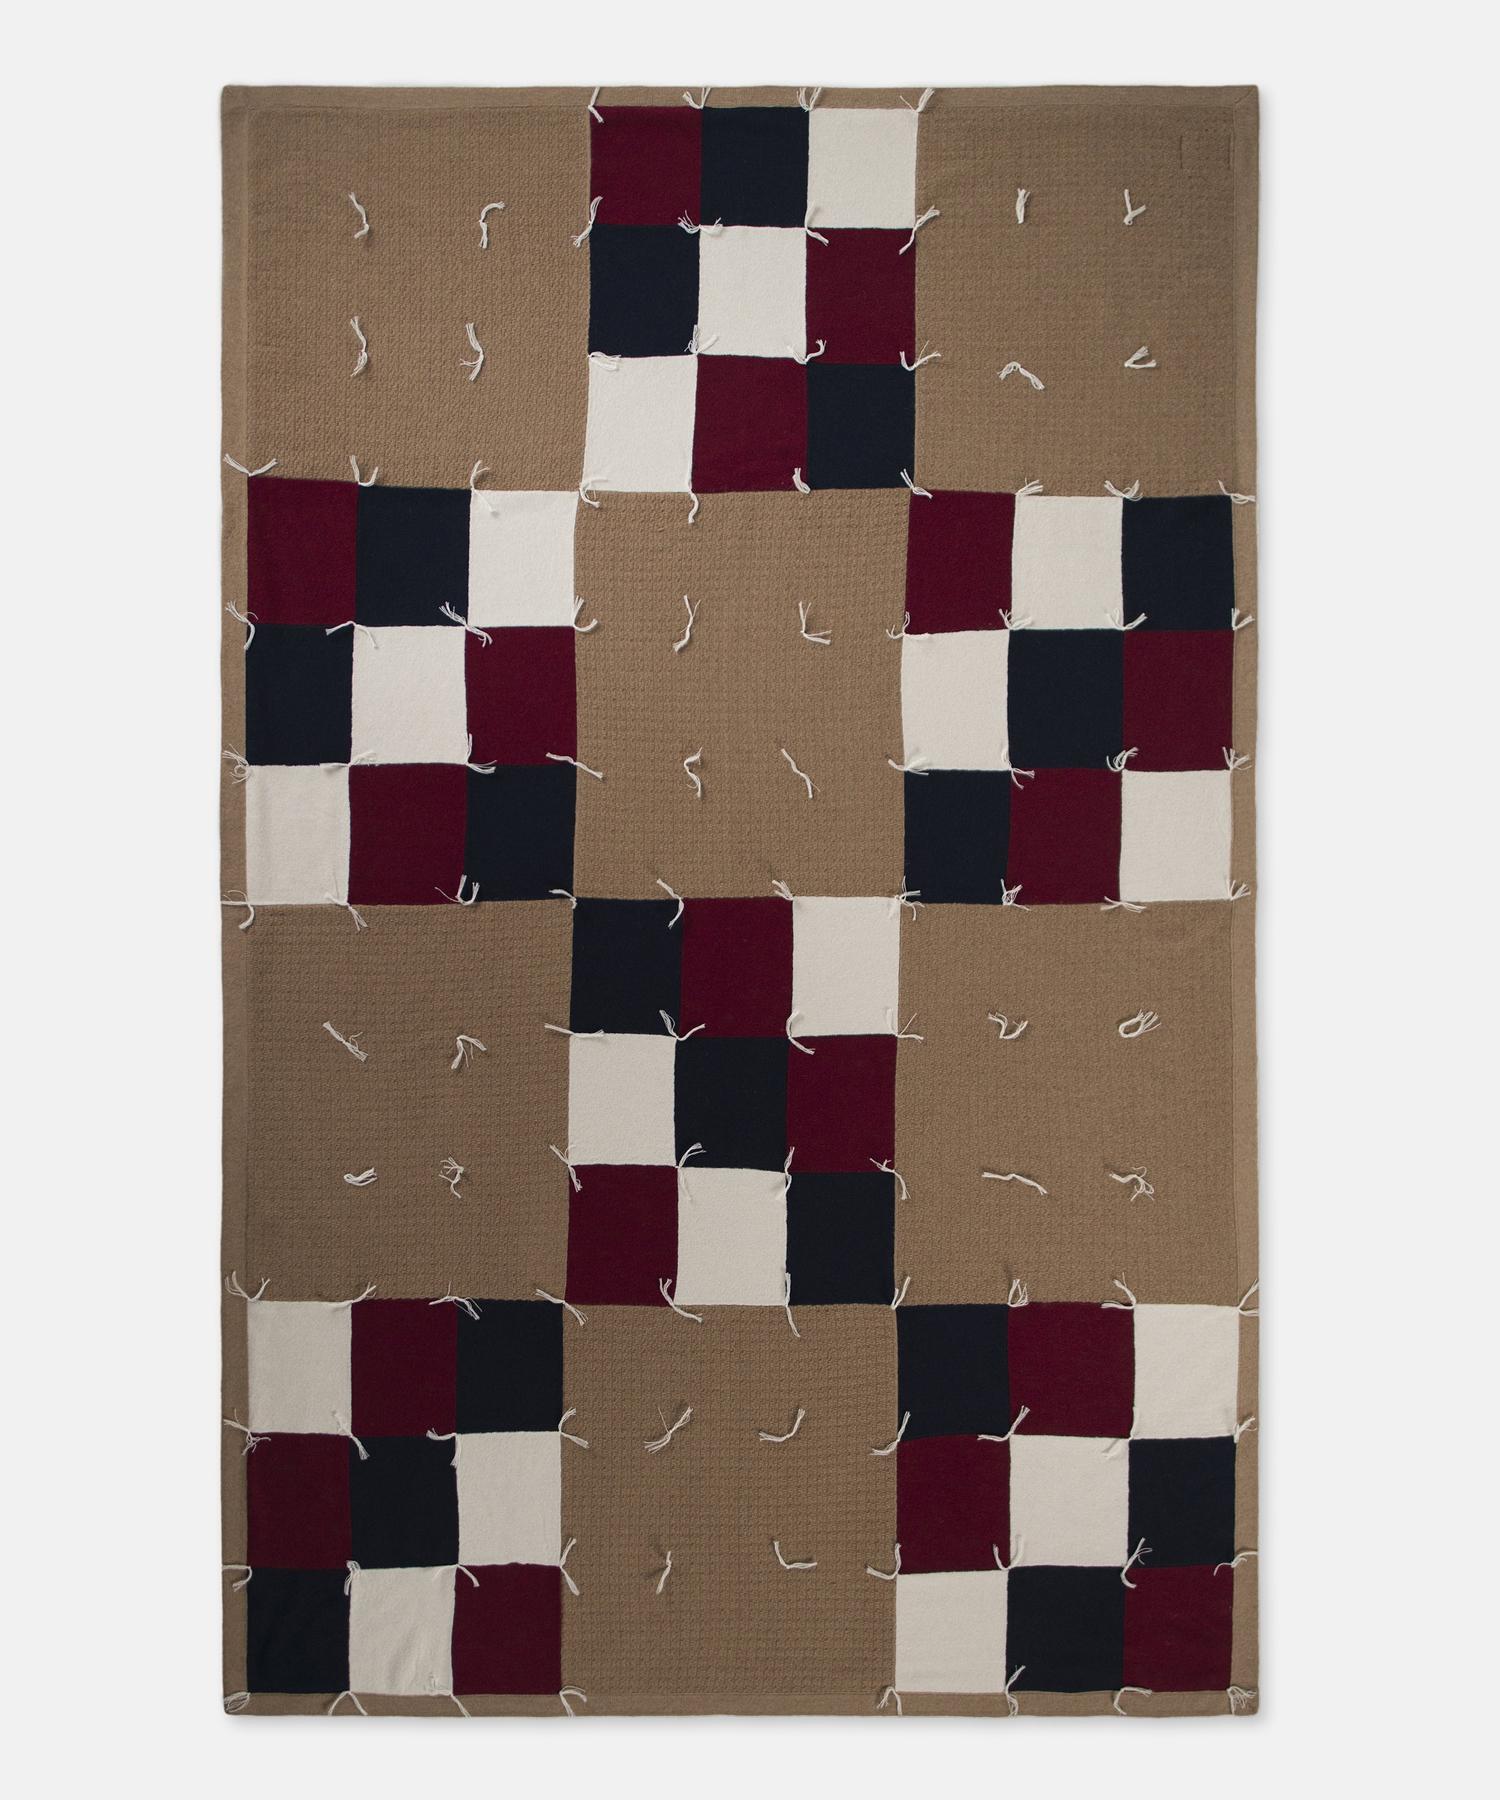 Mongolian Patchwork Tacked Quilt by Saved, New York